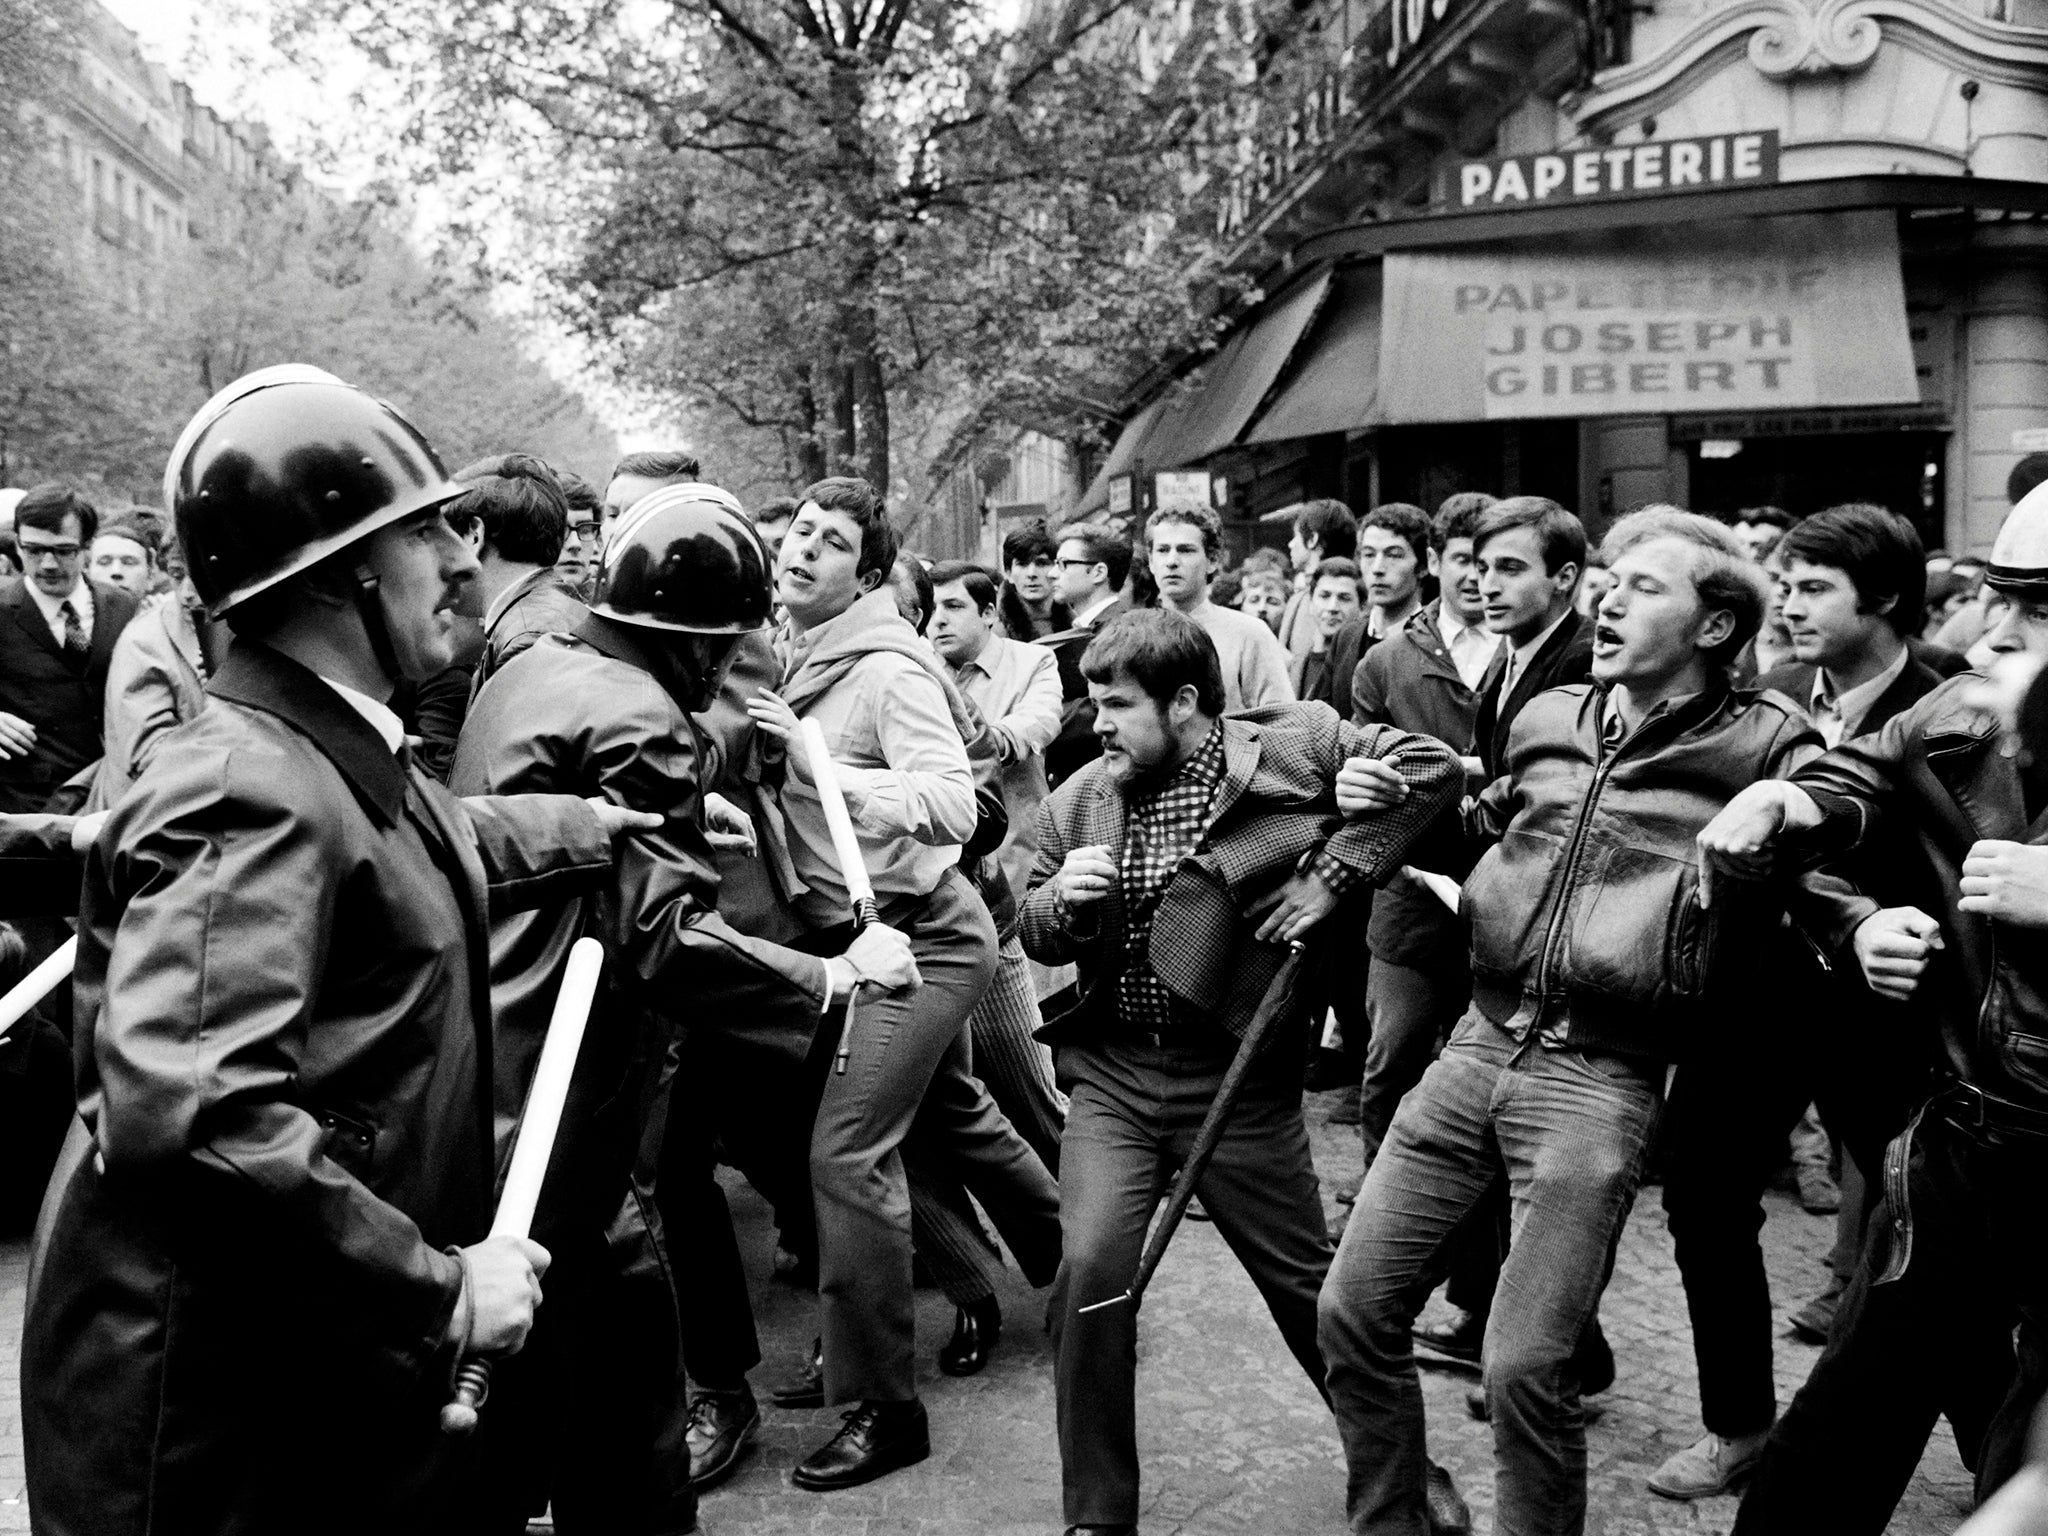 Protesters face police in front of the Joseph Gibert bookstore, Boulevard Saint Michel, in May 1968 in Paris (AFP/Getty)